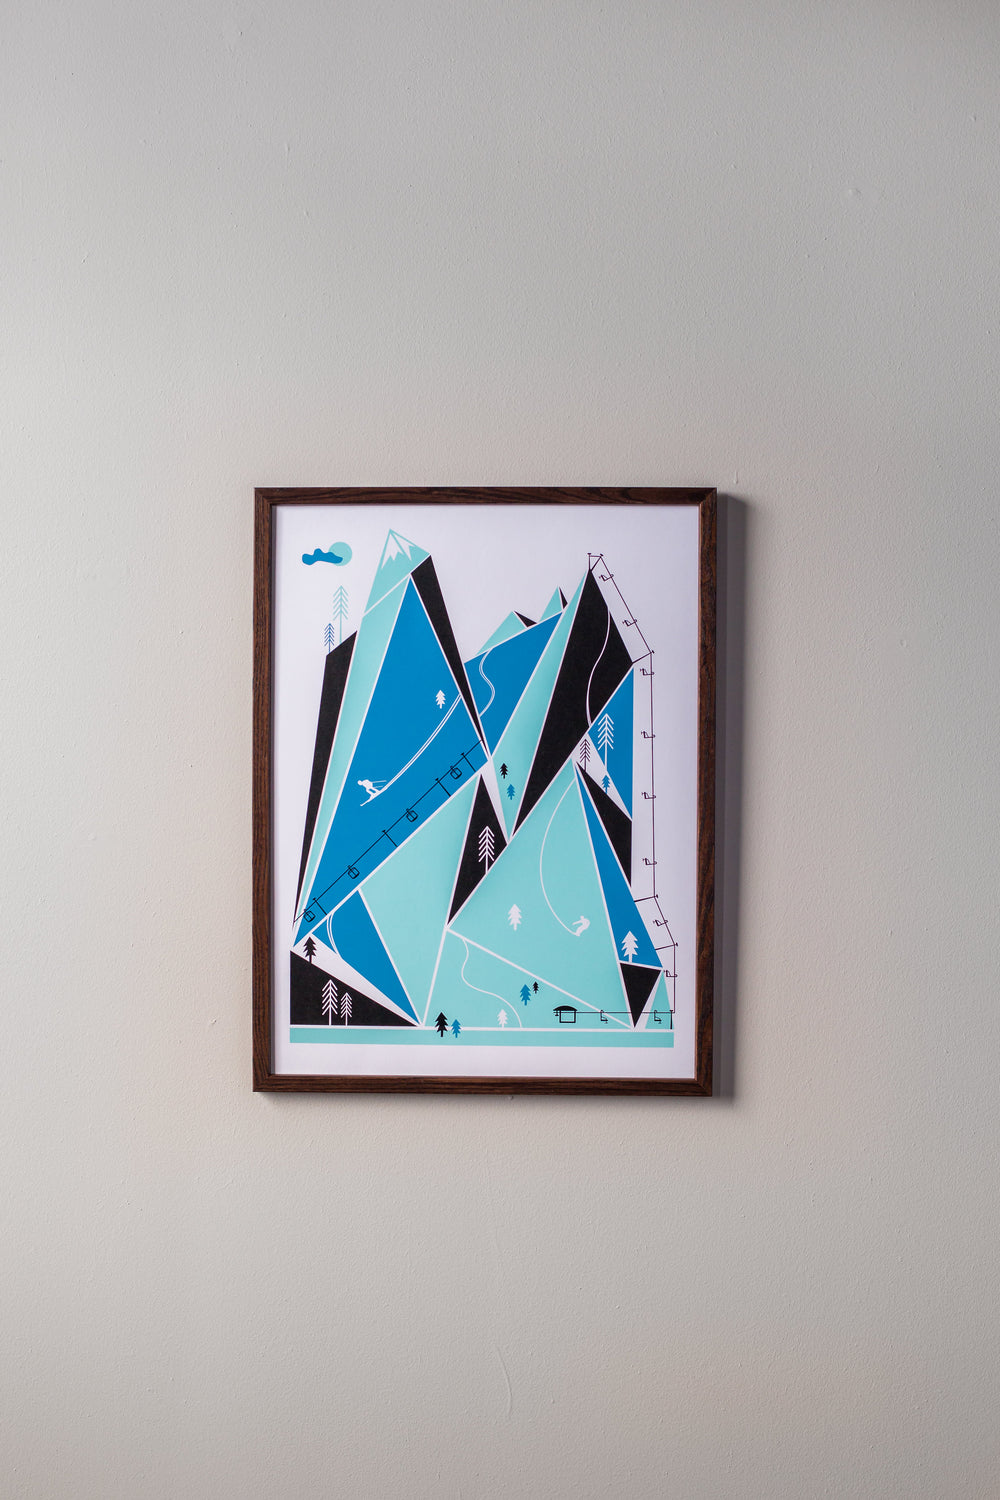 Ski Resort Print by Brainstorm - Get outside and go skiing! Winter Vibes! 